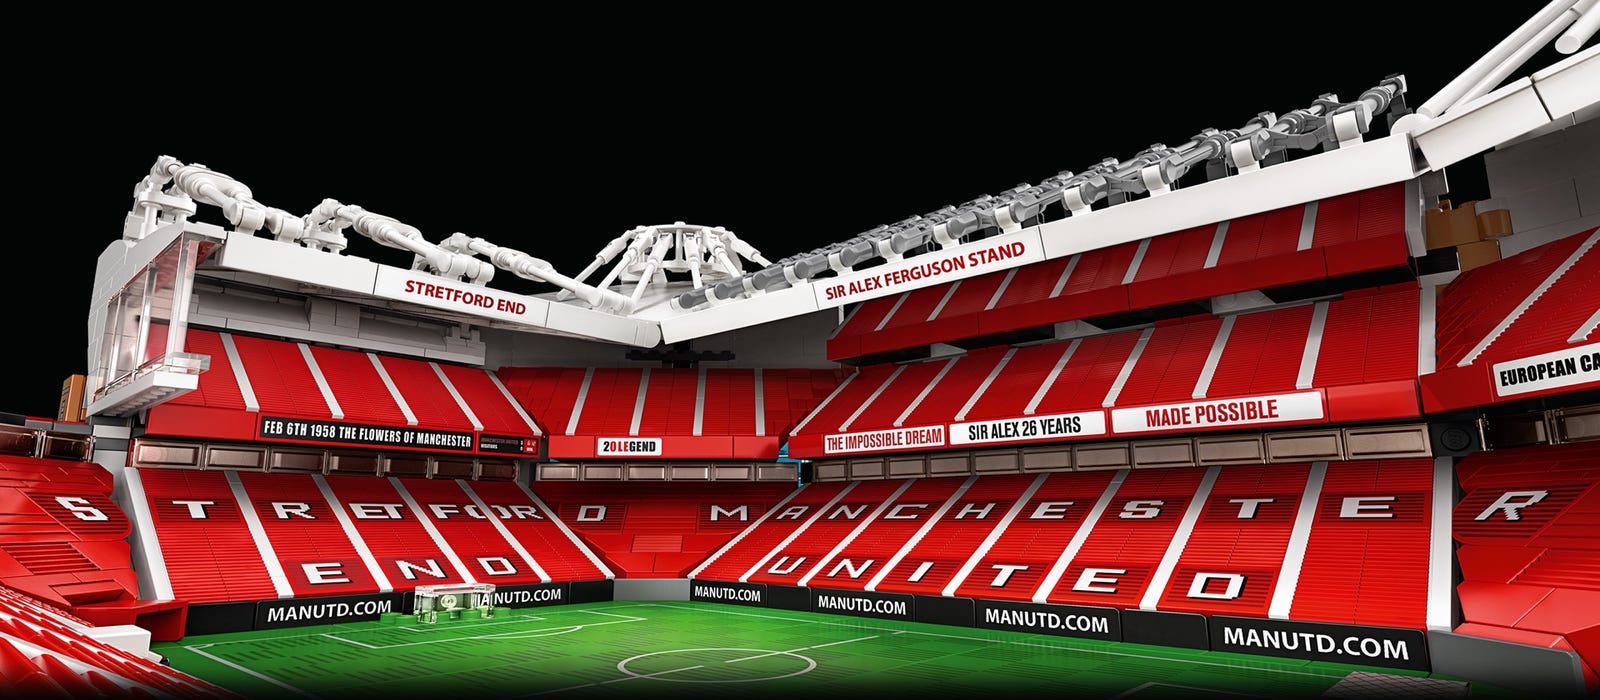 Old Trafford - Manchester United 10272, LEGO® Icons